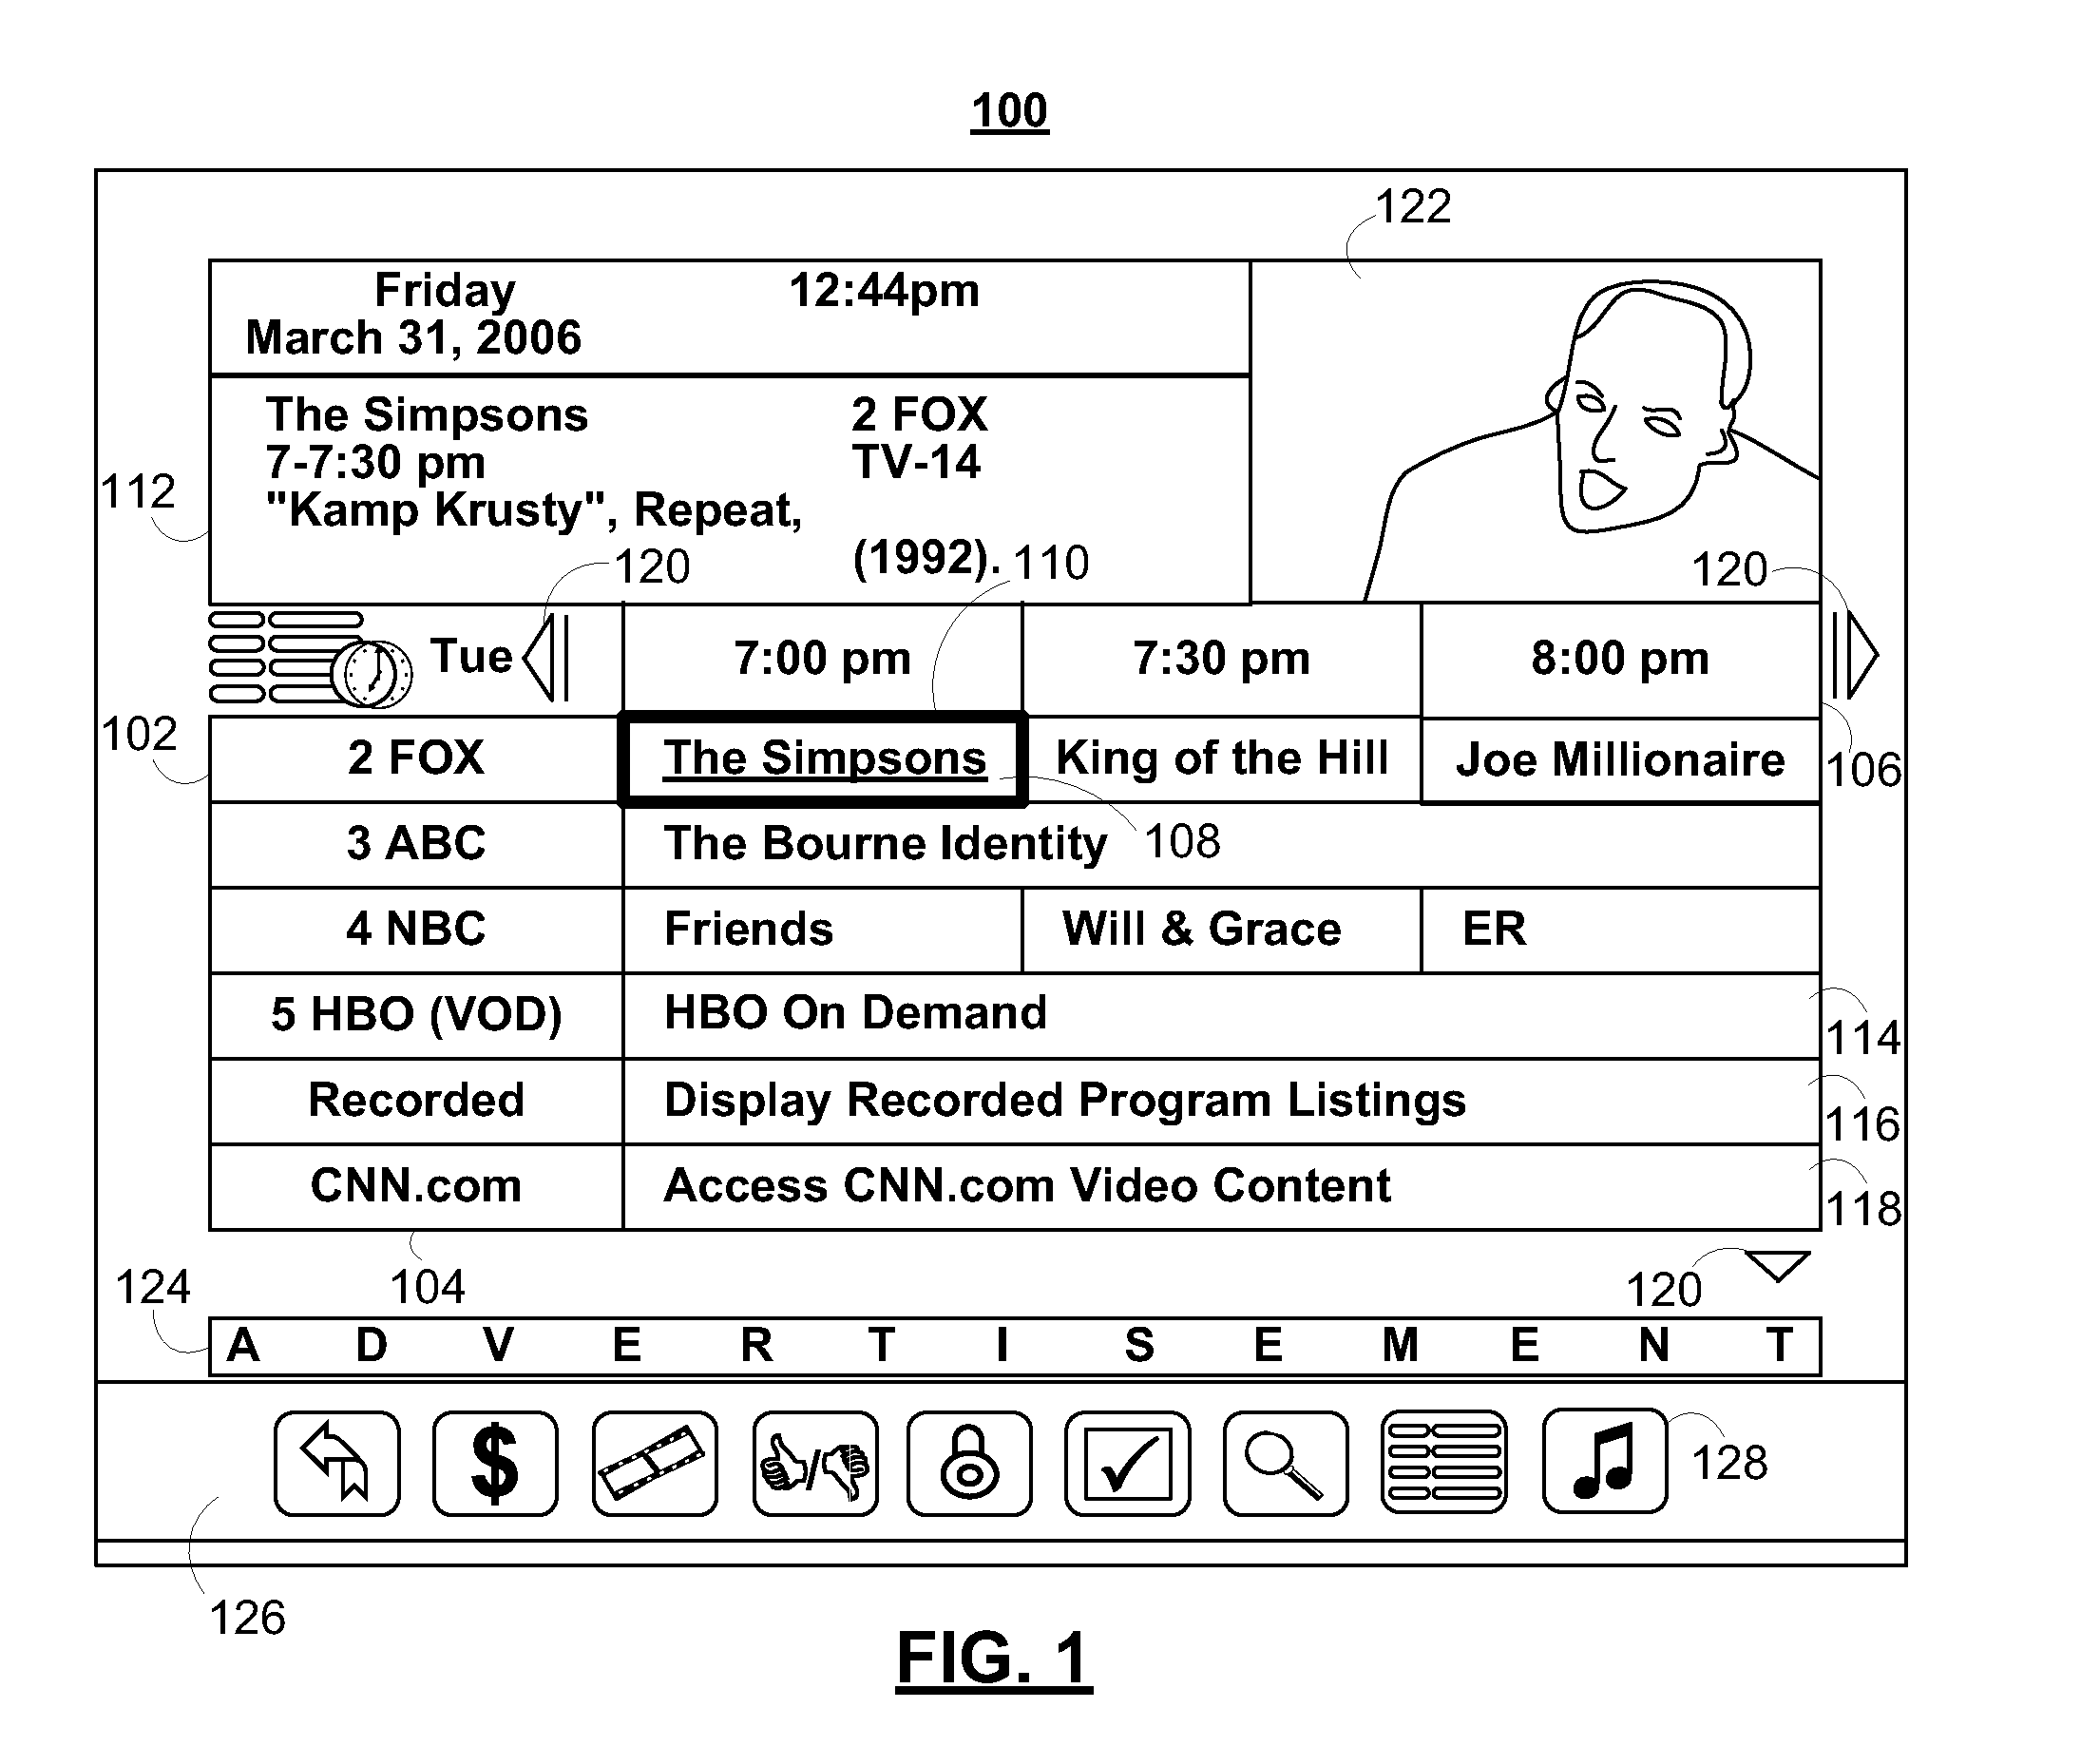 Systems and methods for identifying audio content using an interactive media guidance application